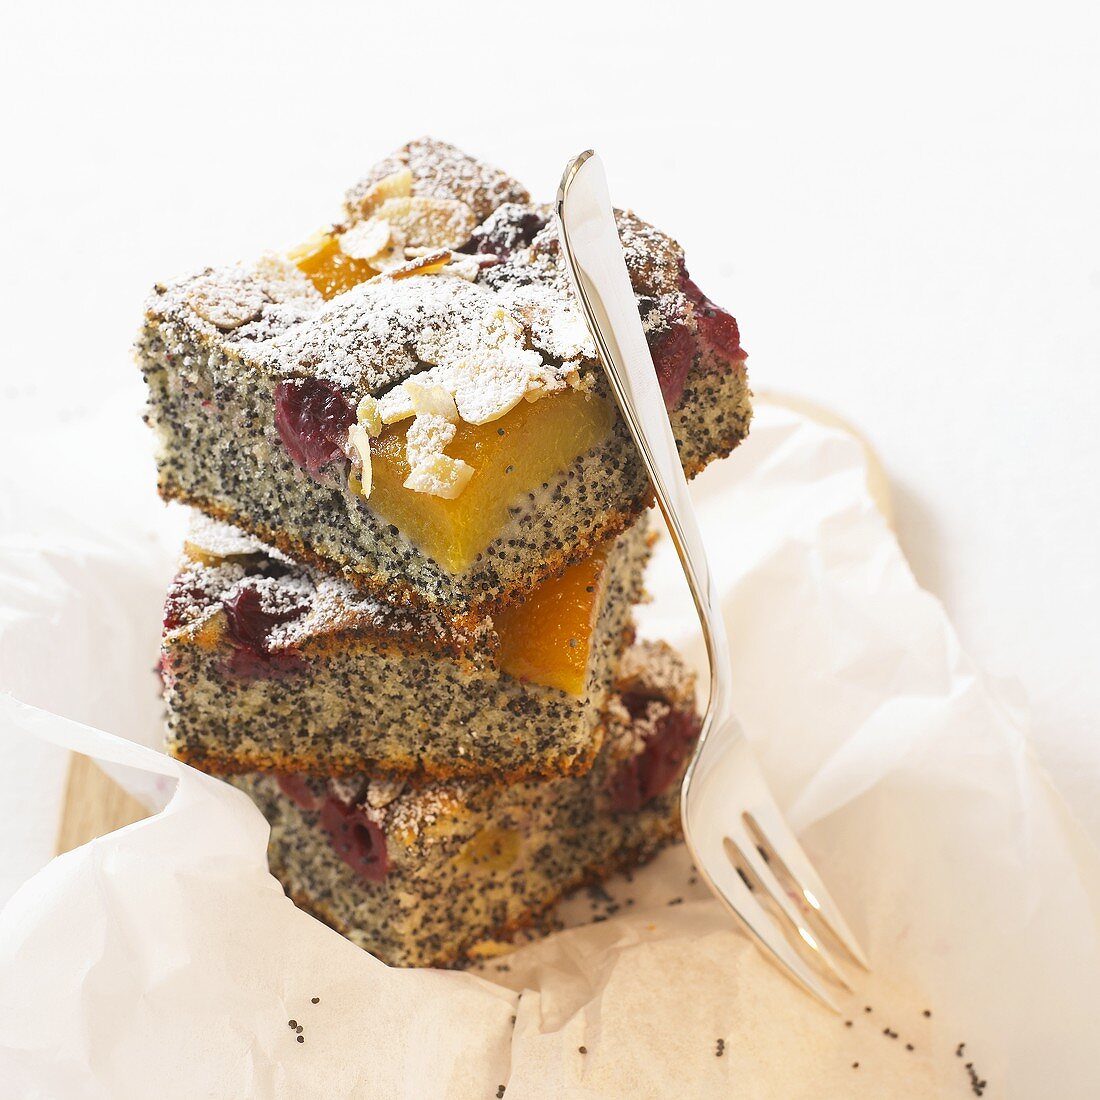 Several pieces of moist poppy seed cake (with fruit)